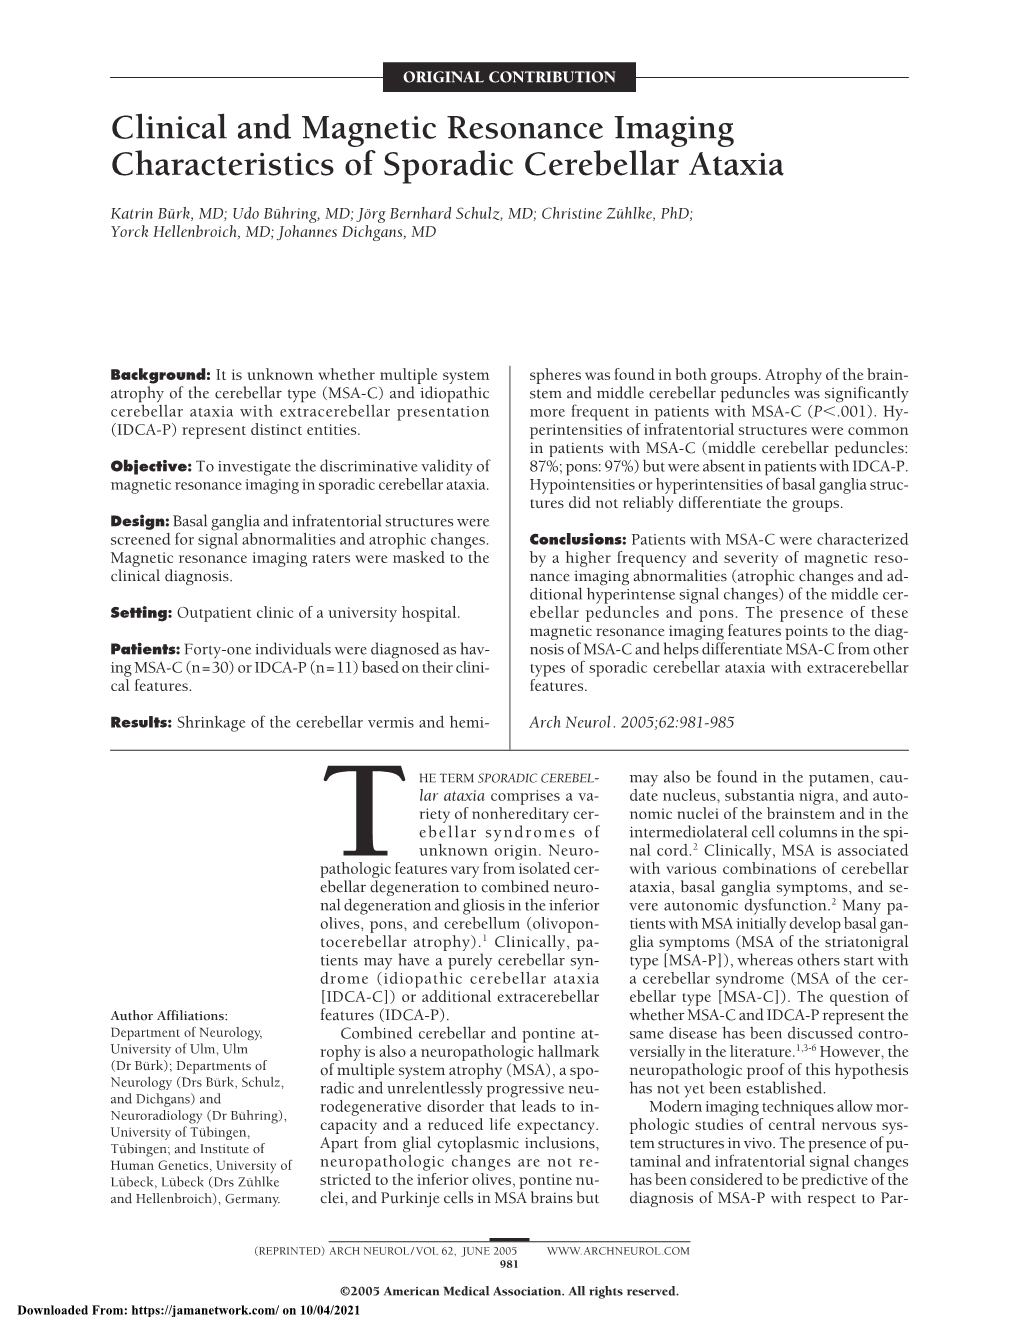 Clinical and Magnetic Resonance Imaging Characteristics of Sporadic Cerebellar Ataxia